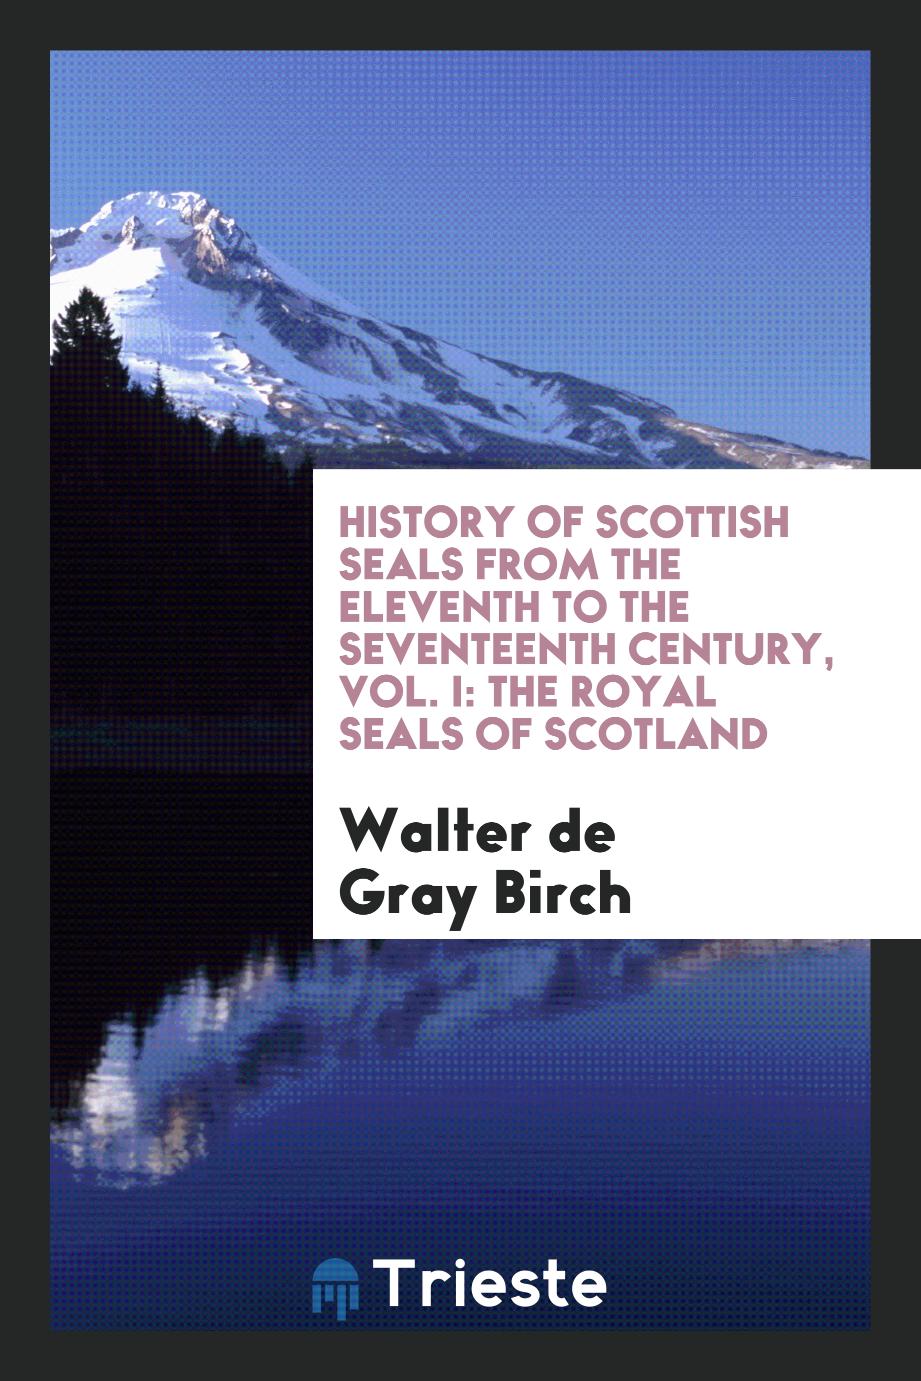 History of Scottish Seals from the Eleventh to the Seventeenth Century, Vol. I: The Royal Seals of Scotland